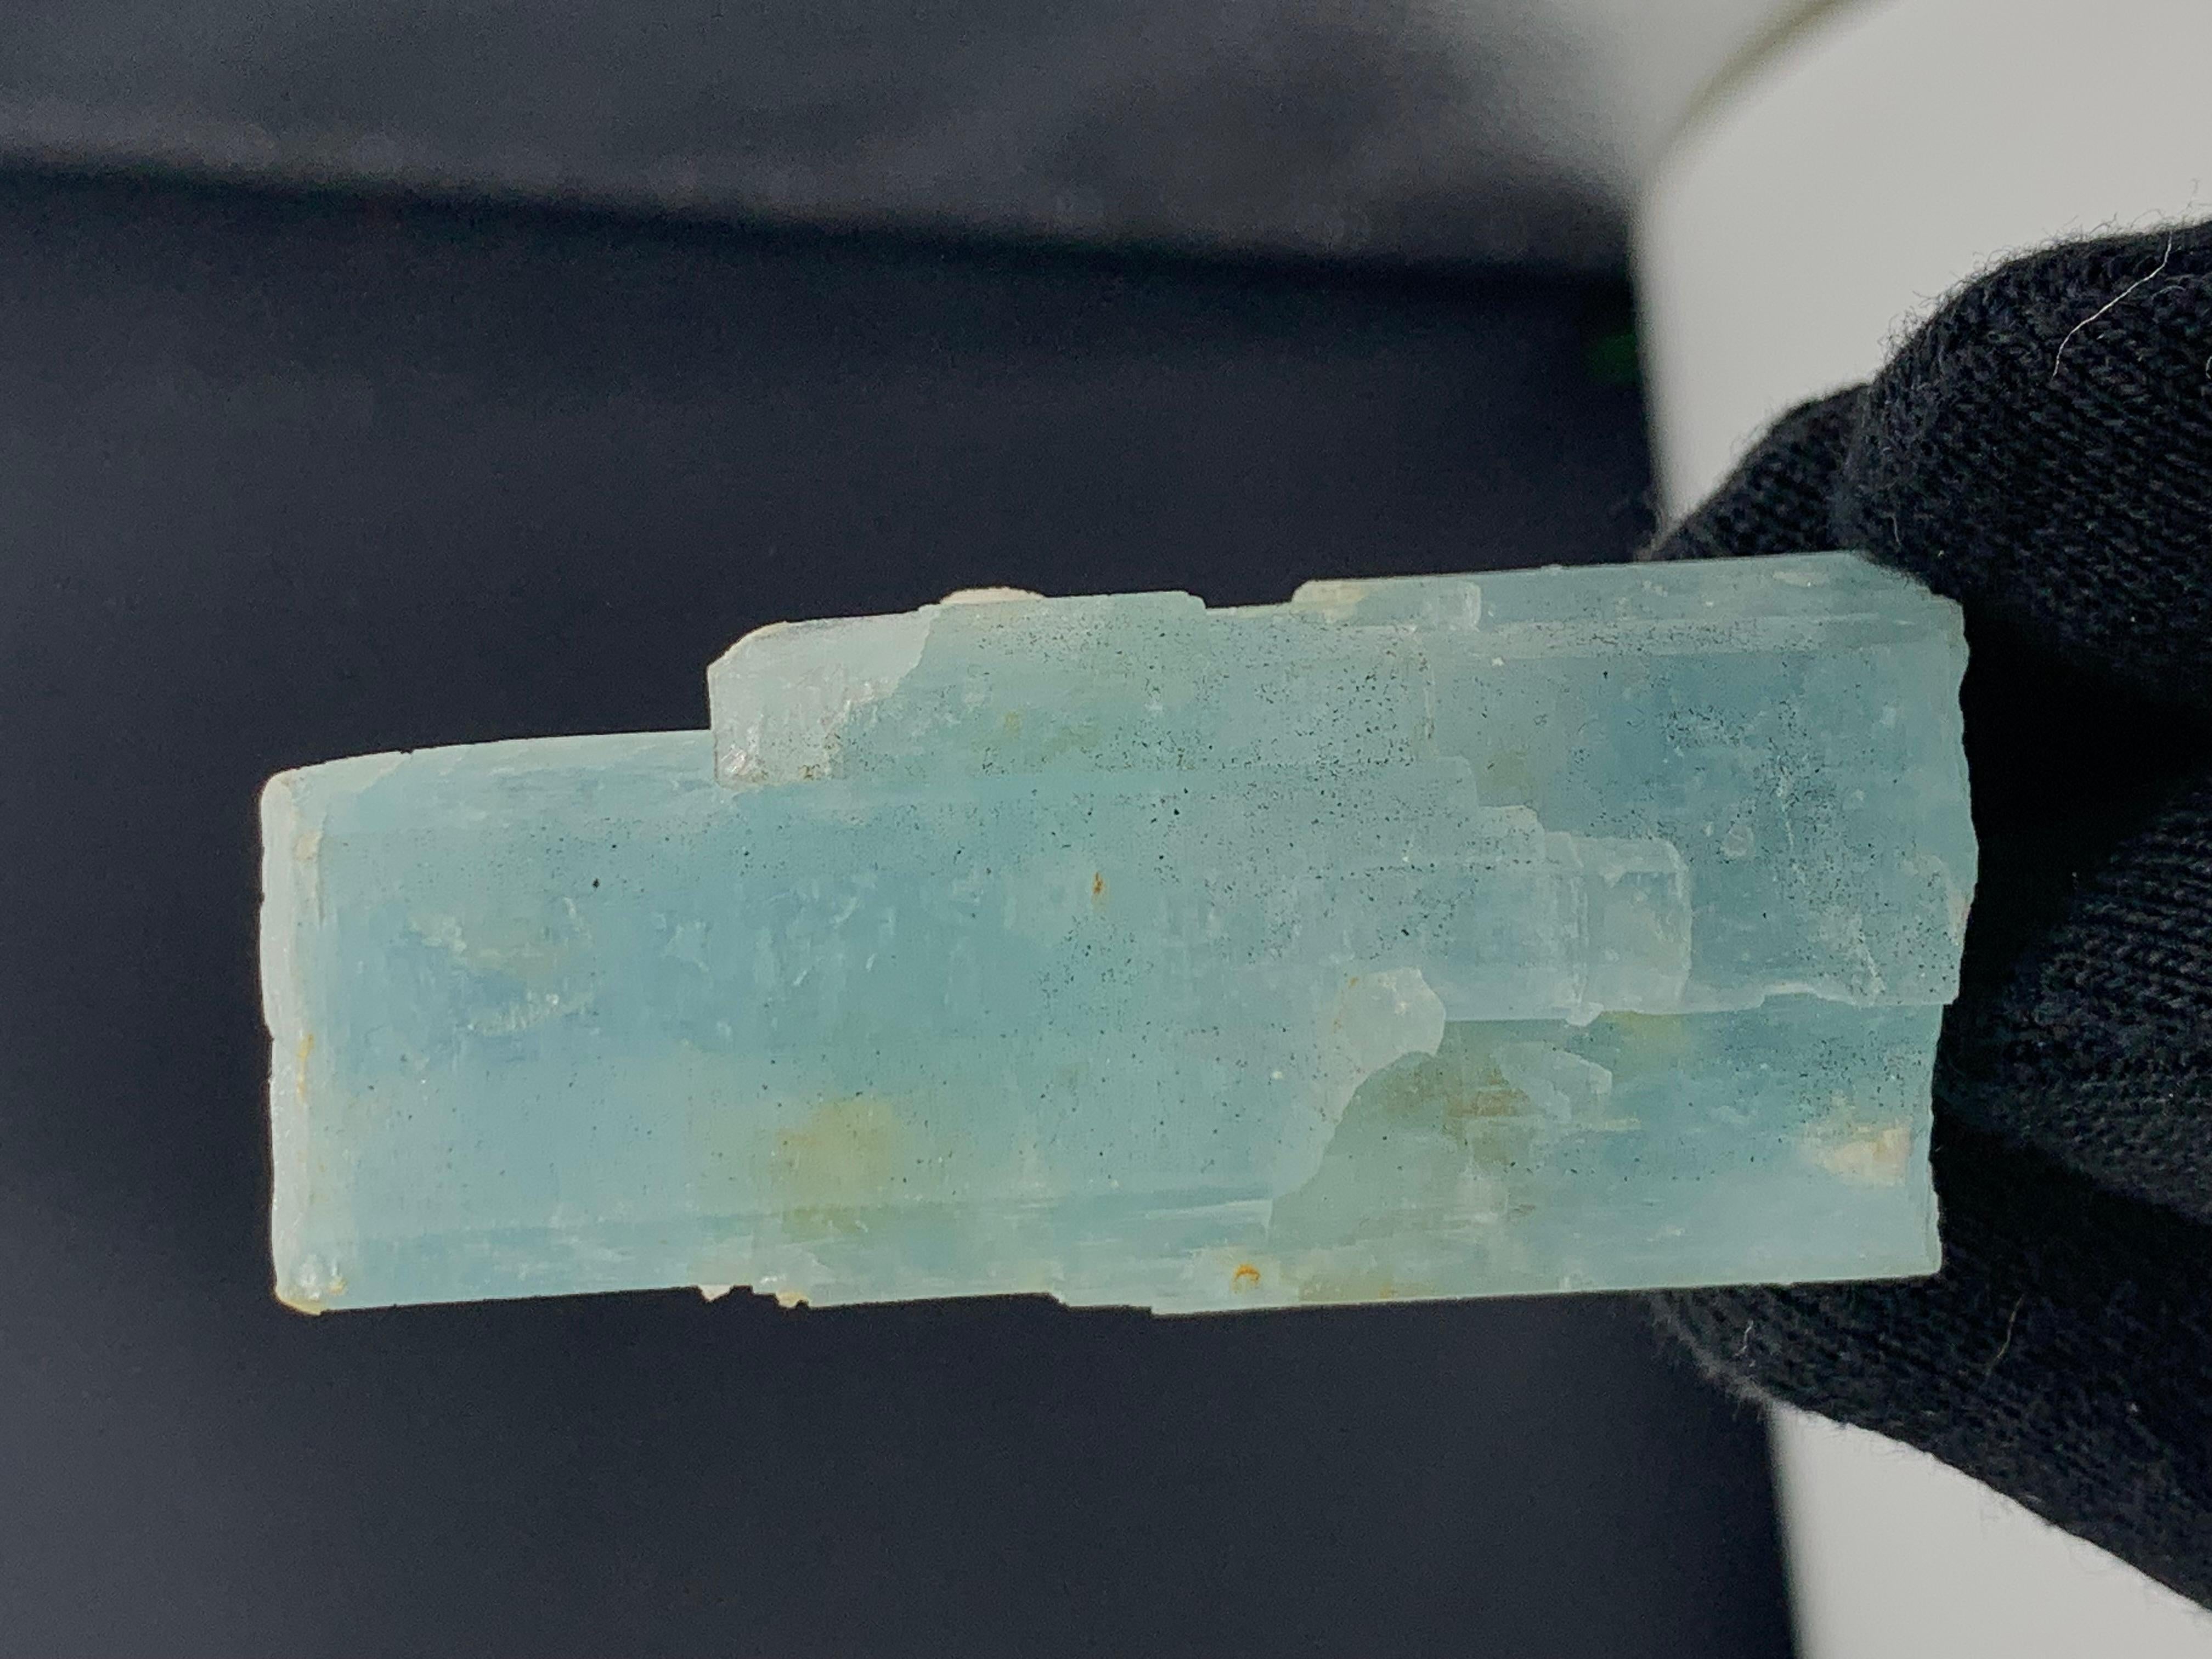 45.75 Excellent Aquamarine Specimen From Skardu, Pakistan 

Weight: 45.75 Gram 
Dimension: 5.9 x 2.6 x 2.2 Cm 
Origin: Skardu, Pakistan 

Aquamarine is a pale-blue to light-green variety of beryl. The color of aquamarine can be changed by heat.